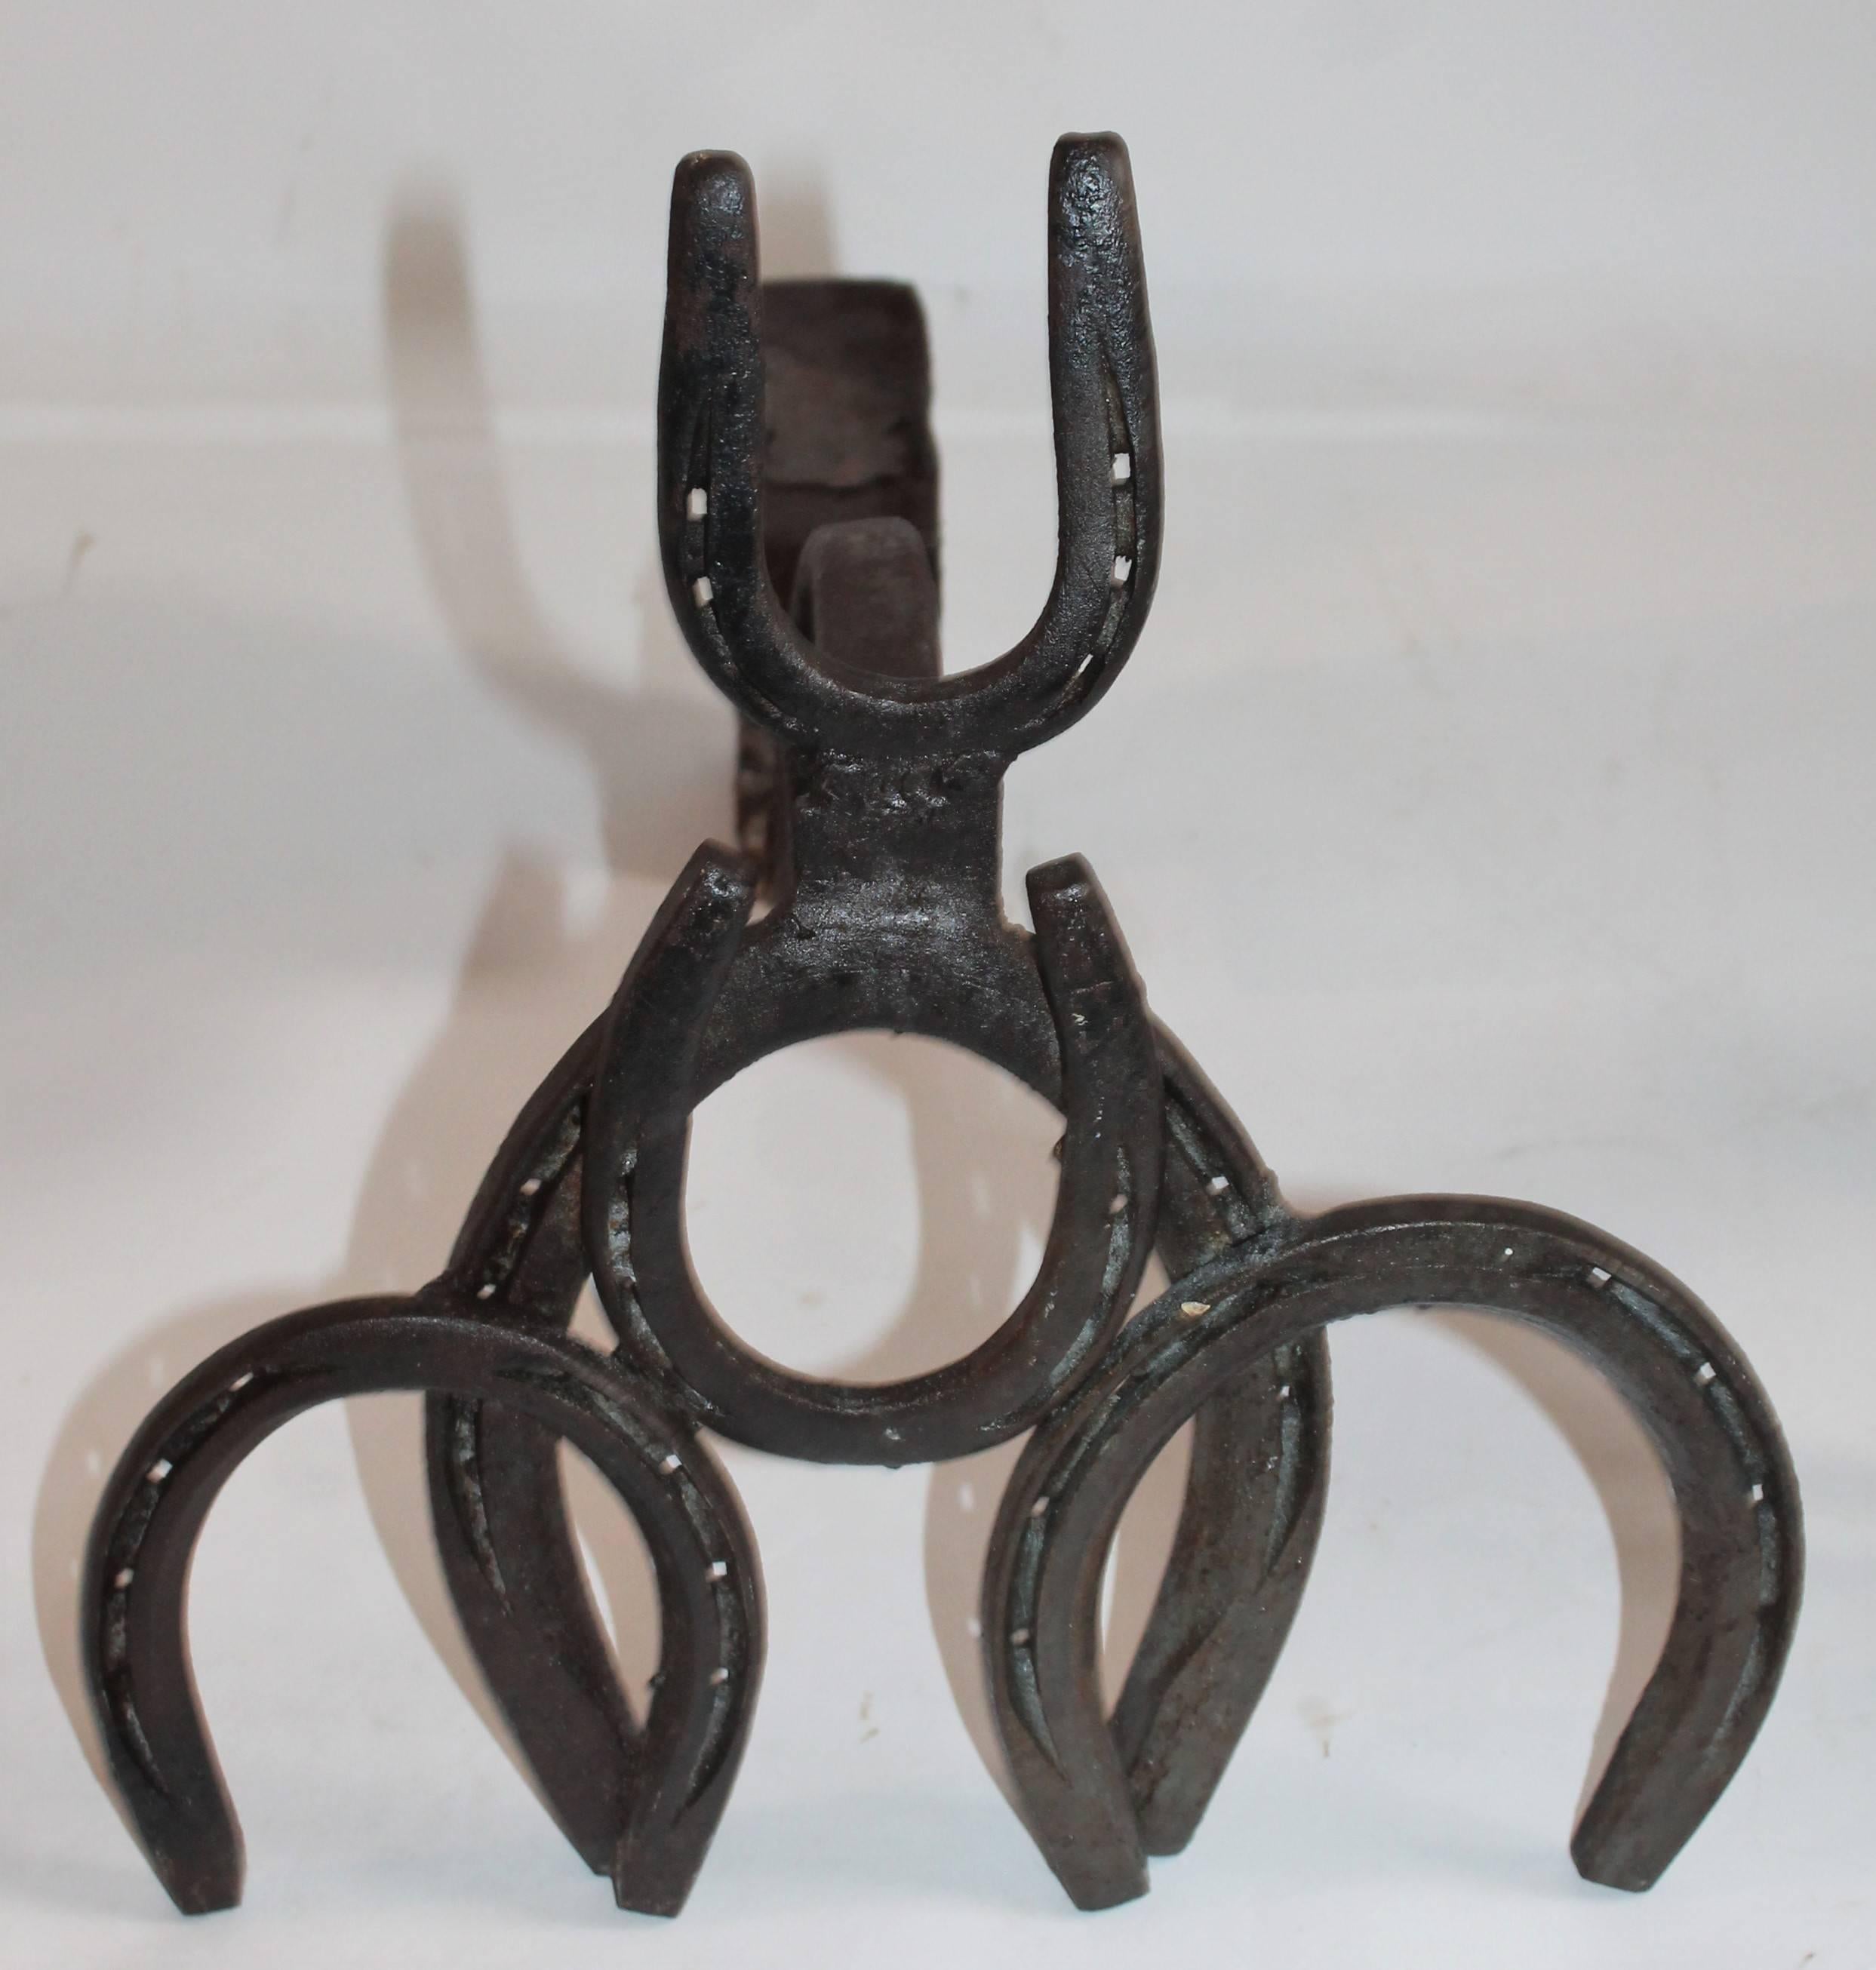 These folky handmade horse shoe andirons are in good condition and are very sturdy and heavy. Wonderful western Folk Art.